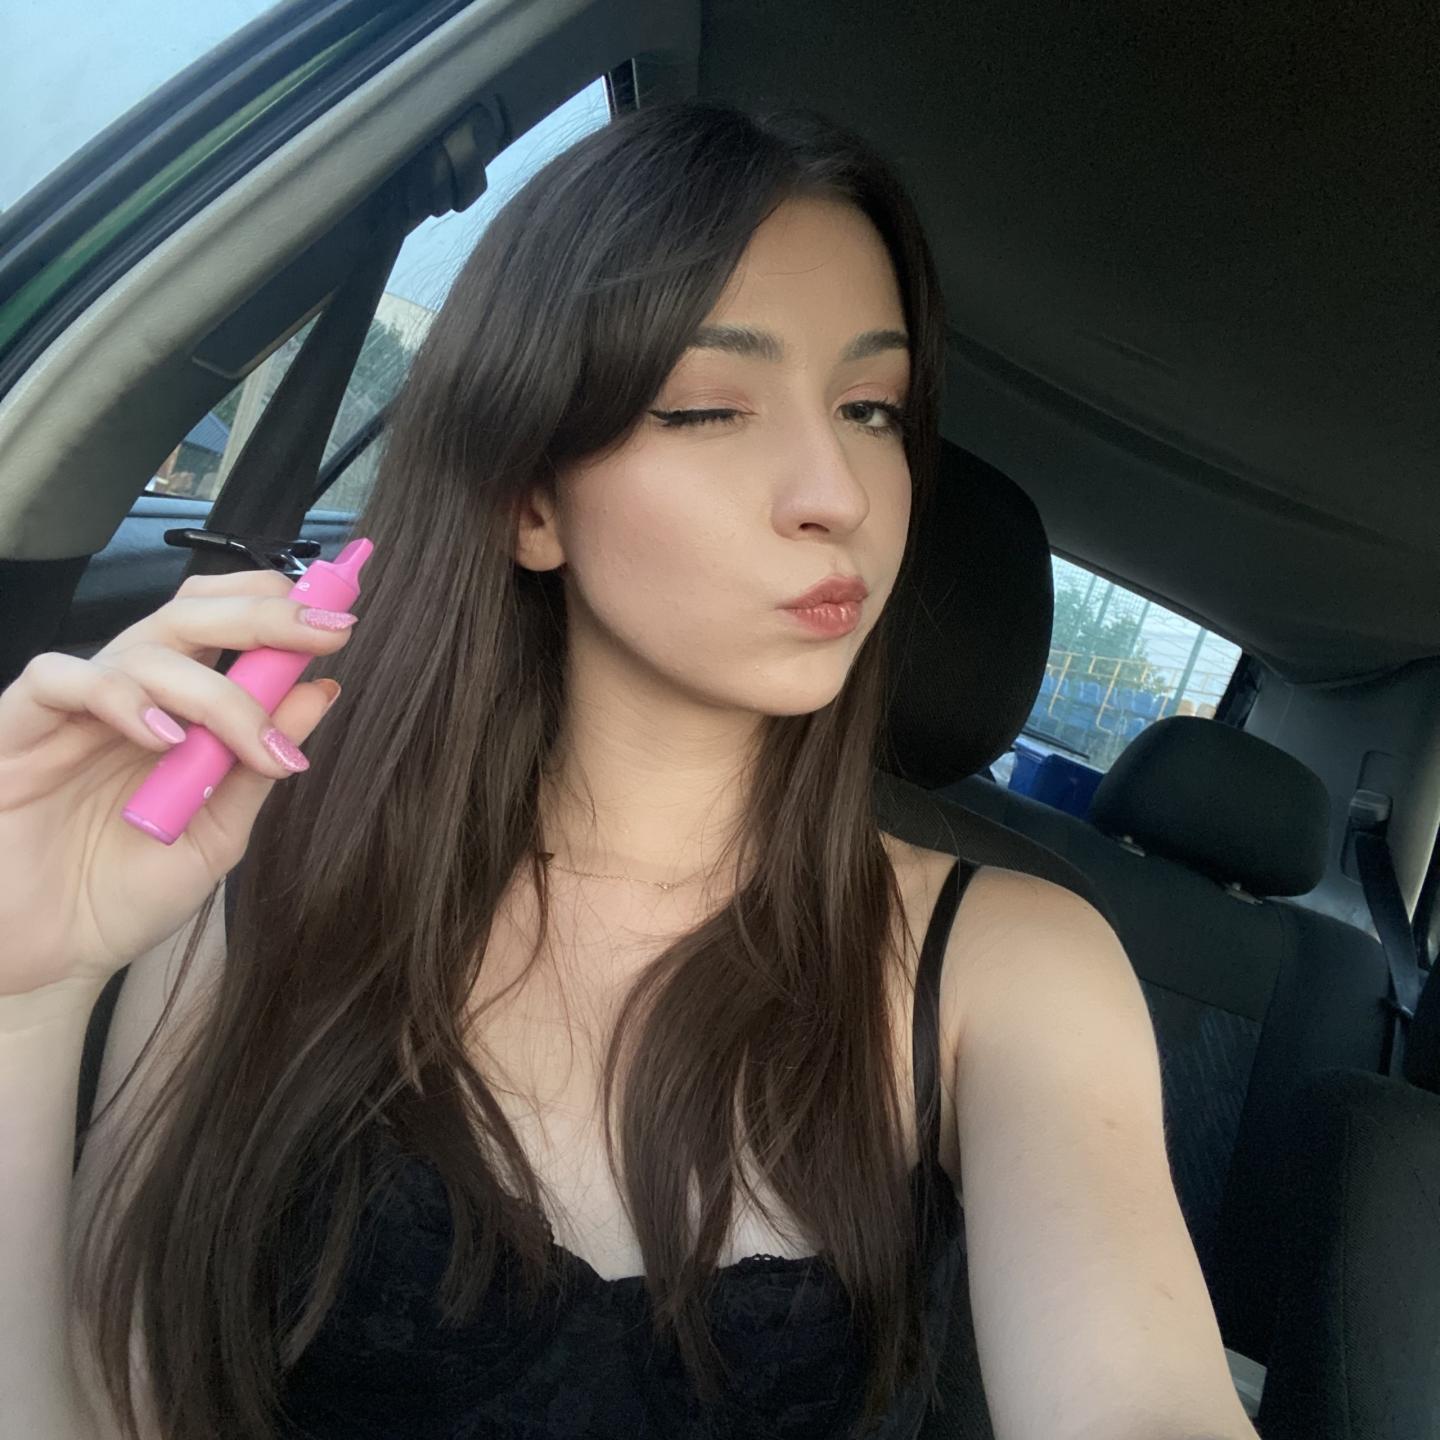 Image of cam model LeahCute from XloveCam